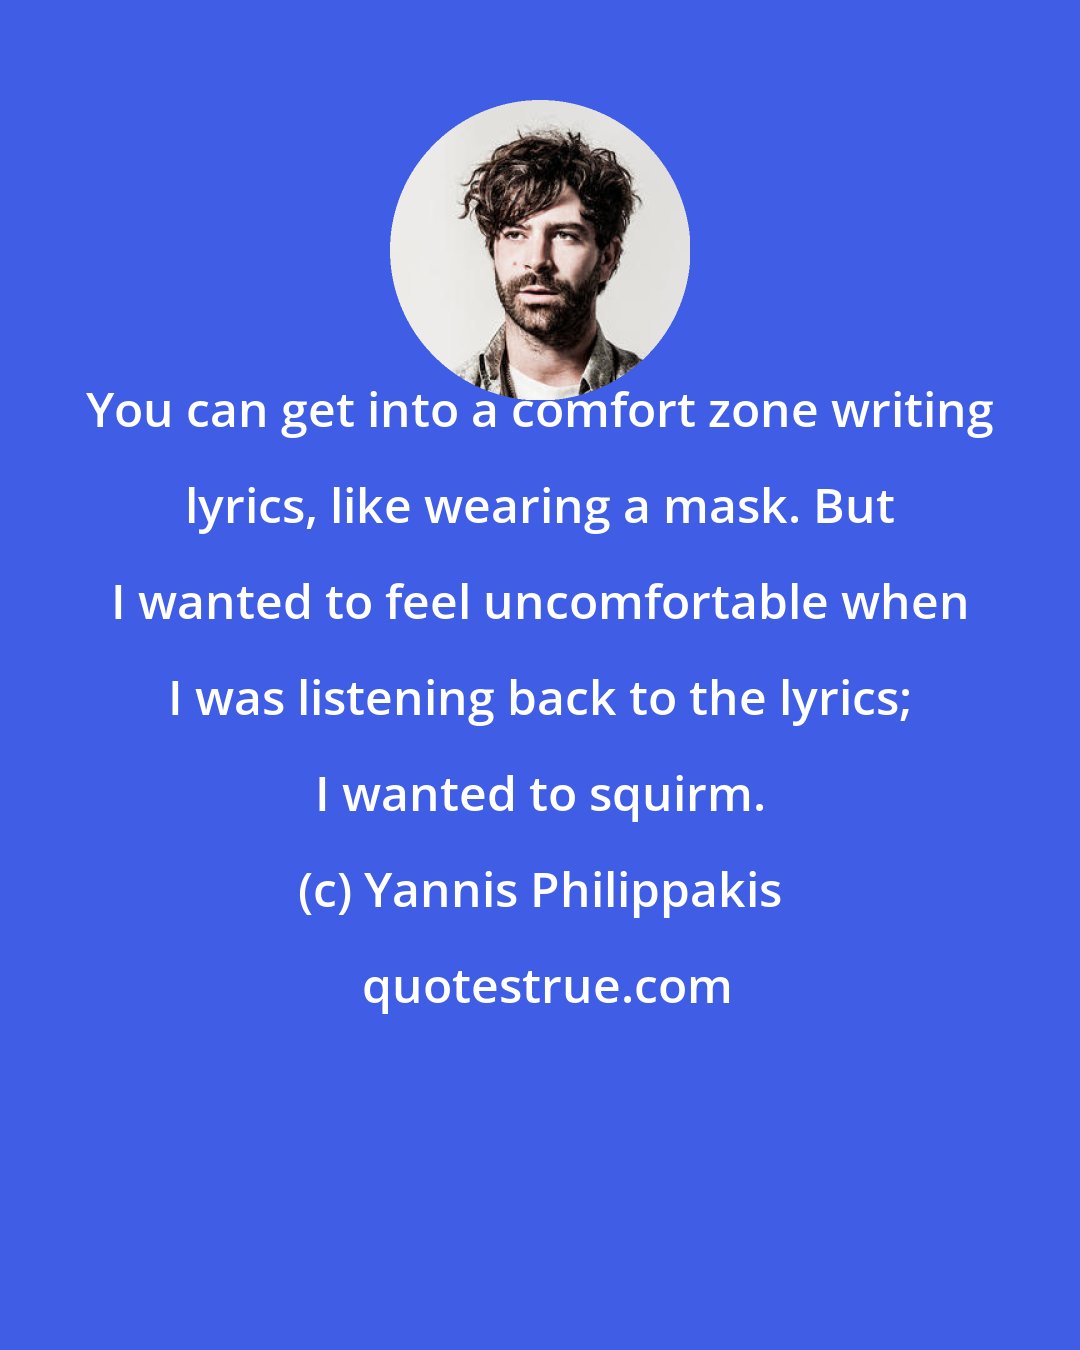 Yannis Philippakis: You can get into a comfort zone writing lyrics, like wearing a mask. But I wanted to feel uncomfortable when I was listening back to the lyrics; I wanted to squirm.